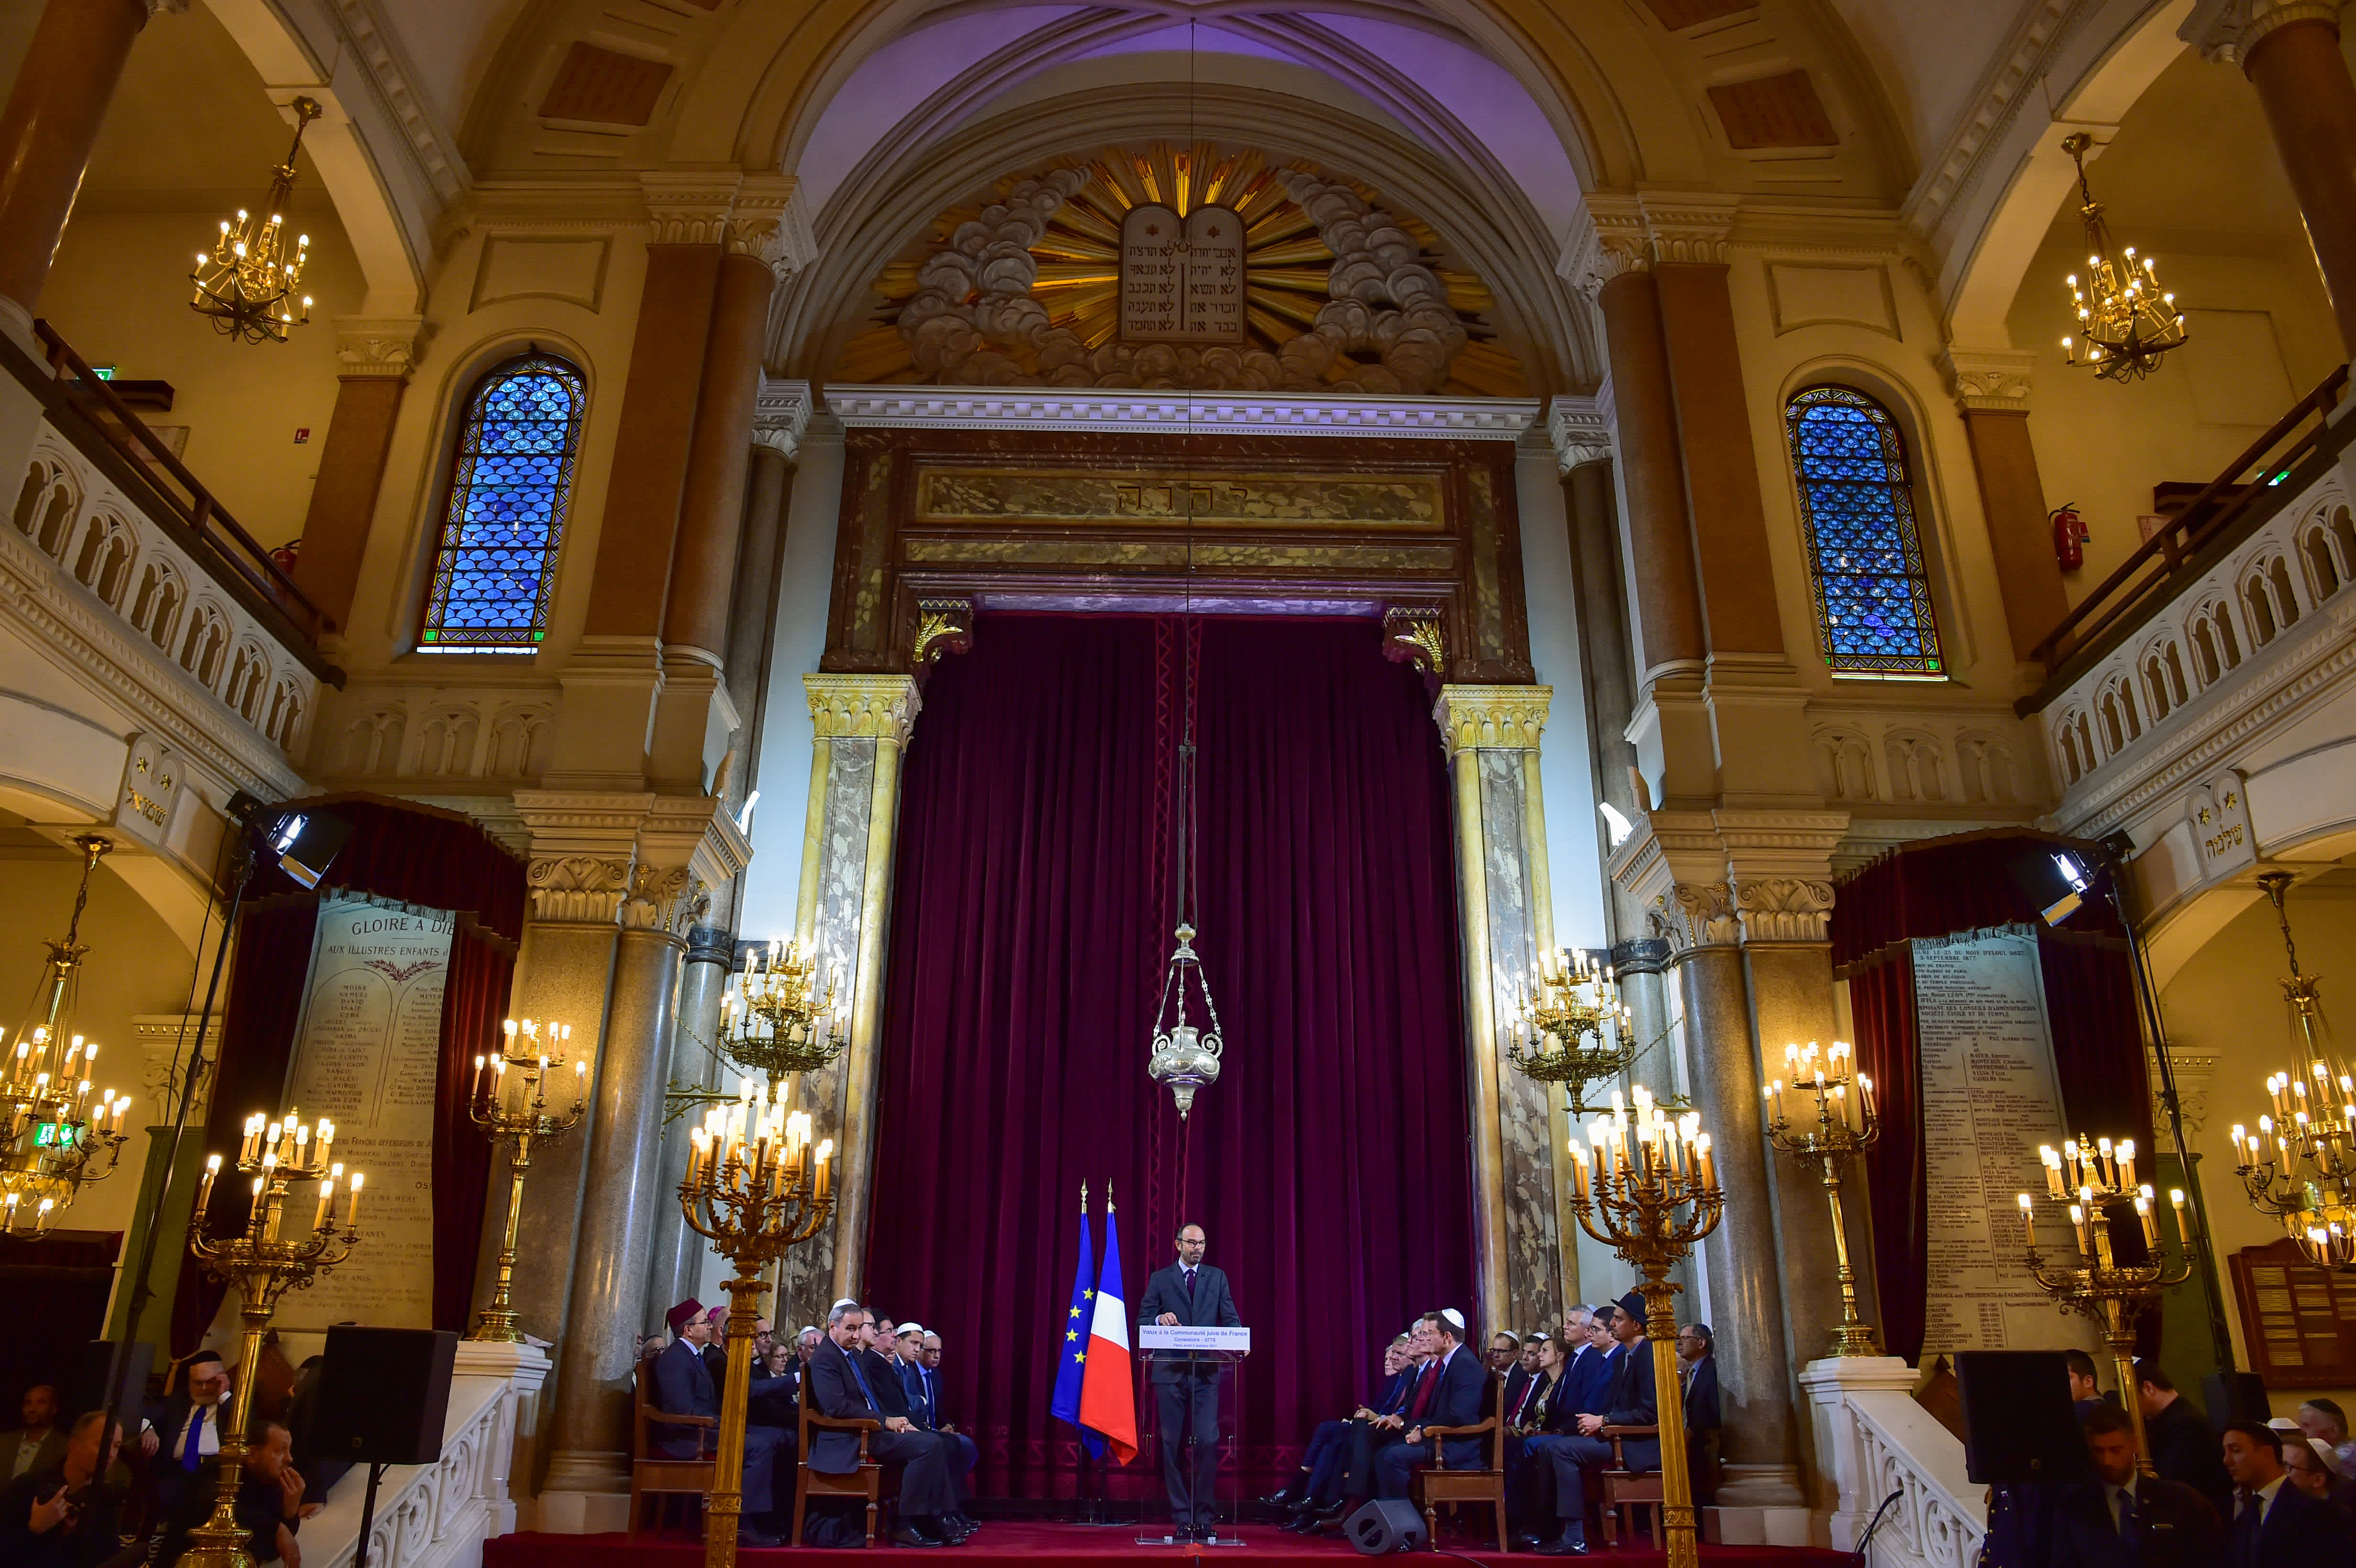 French Prime Minister Edouard Philippe delivers a speech to the Jewish Community for the Jewish New Year, or Rosh Hashanah, at the Buffault Synagogue in Paris, France, October 2, 2017. (Reuters)